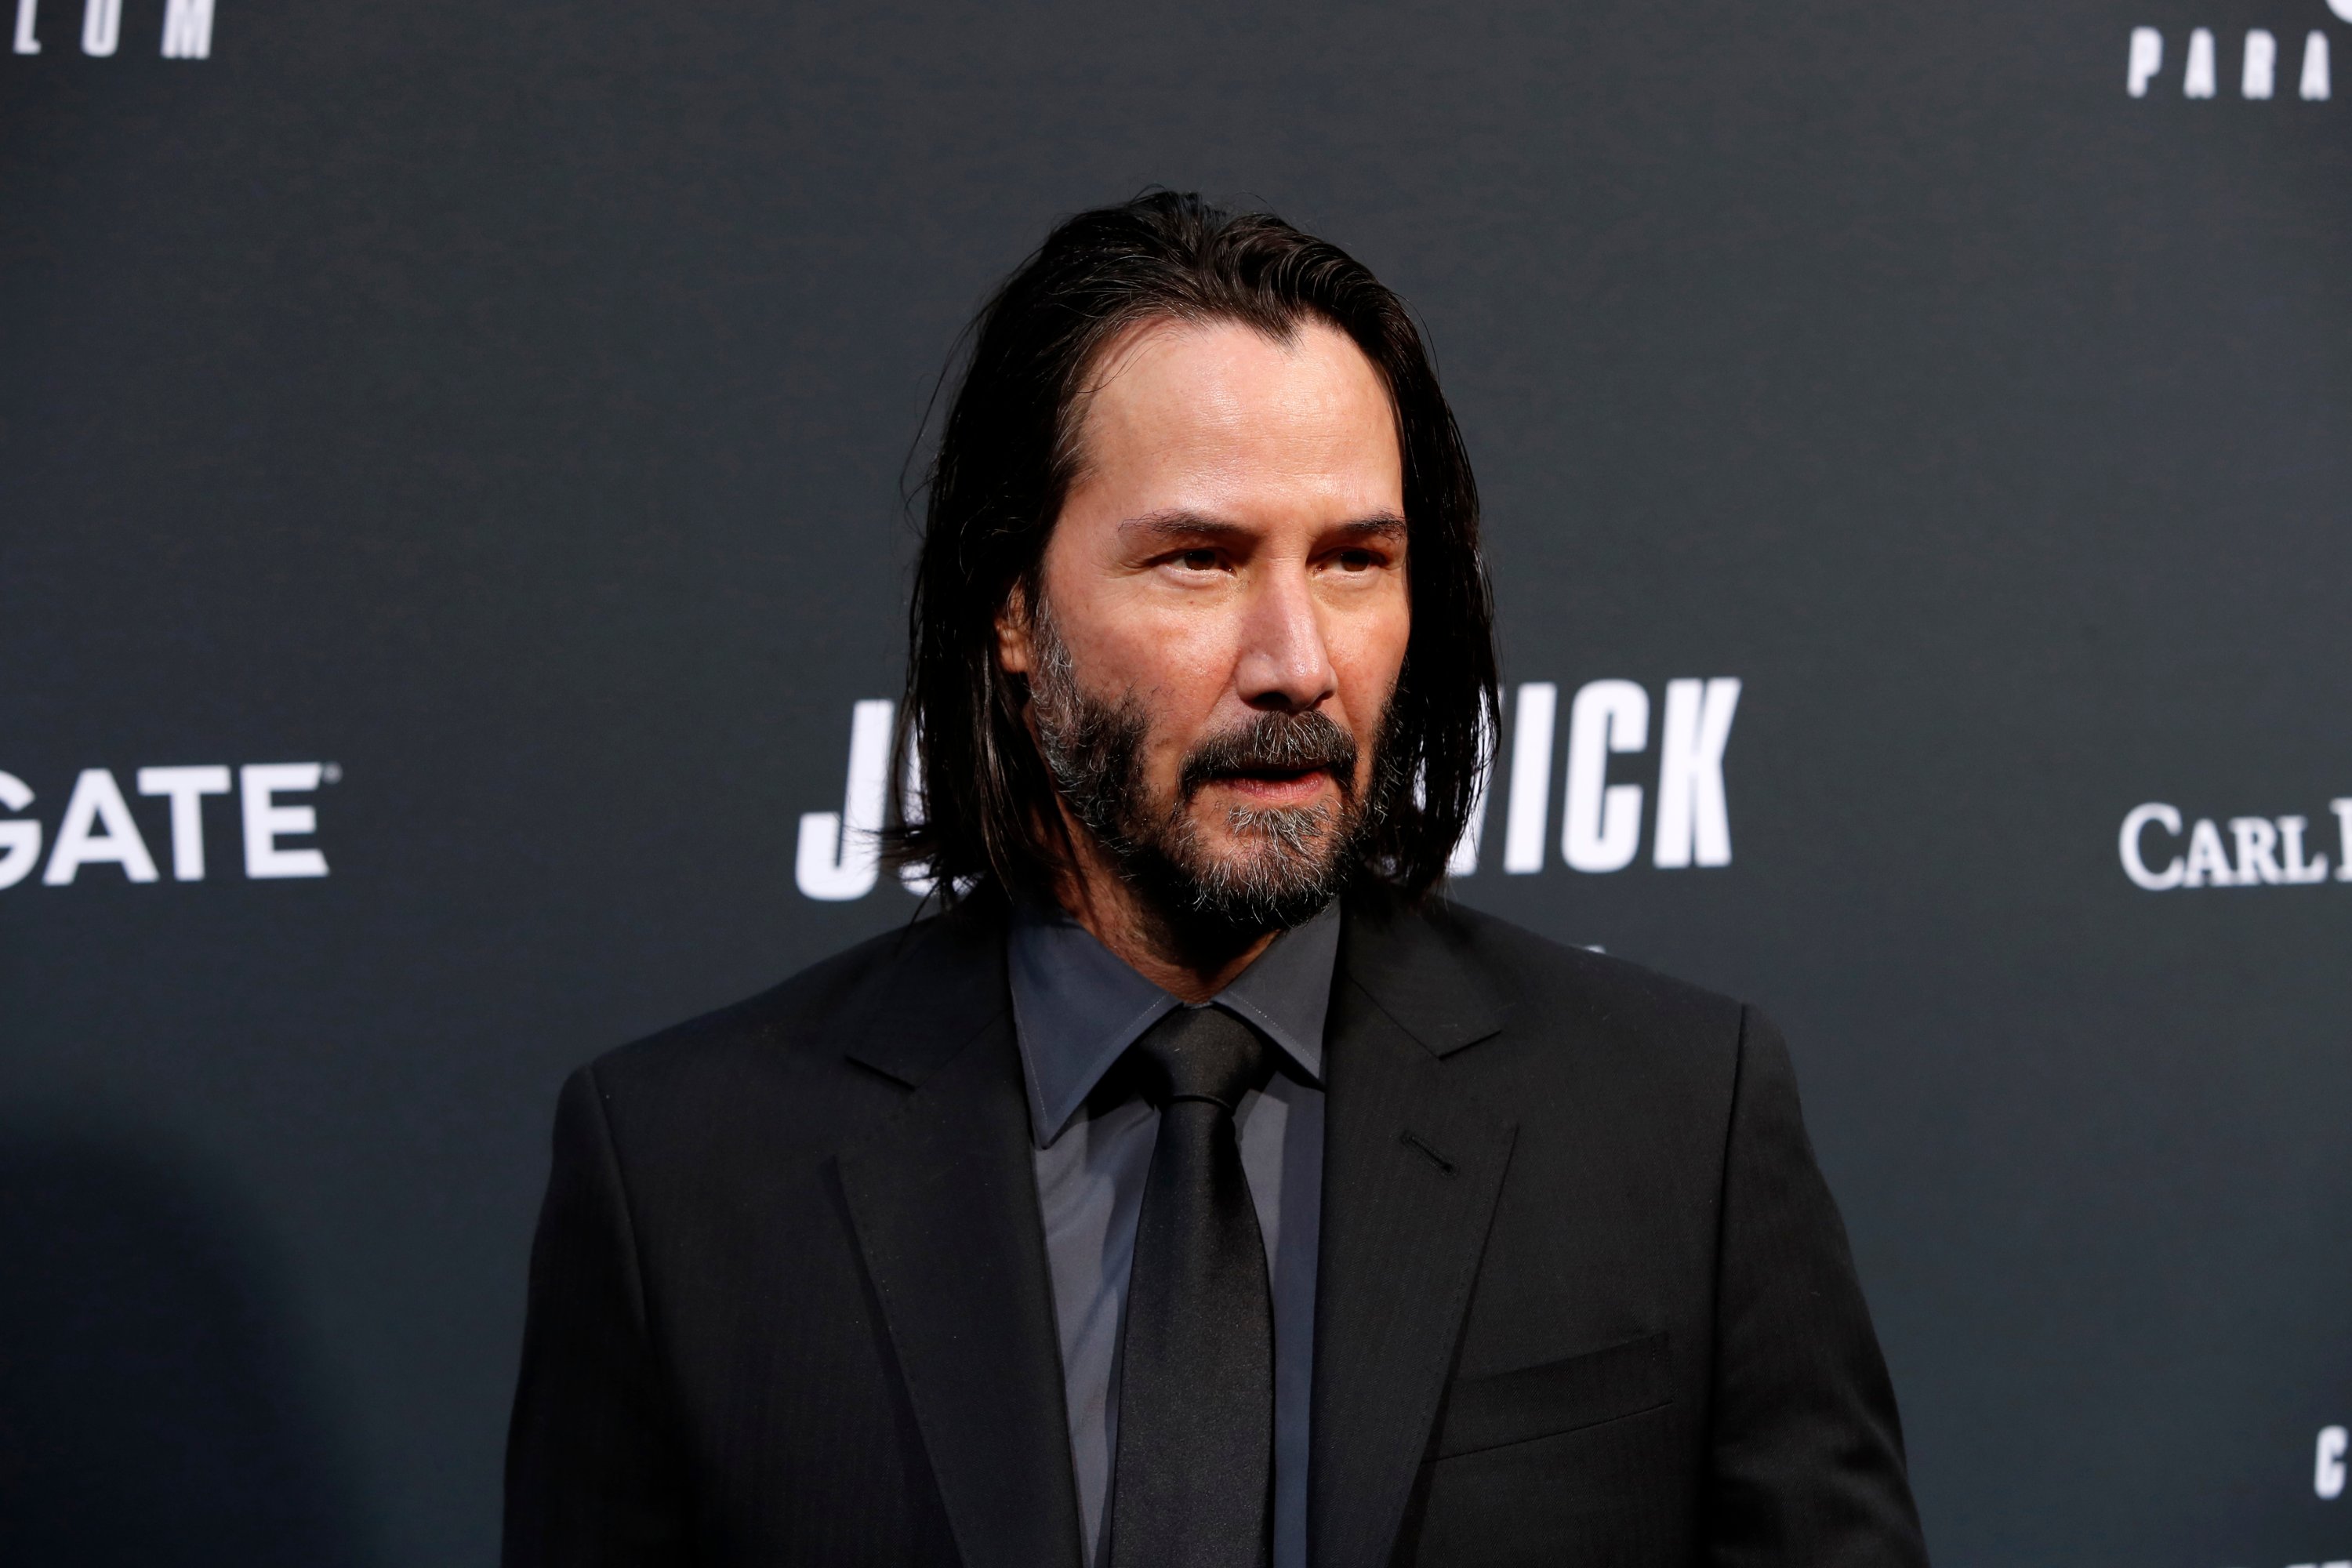 John Wick 5 release date speculation, cast, plot, and more news